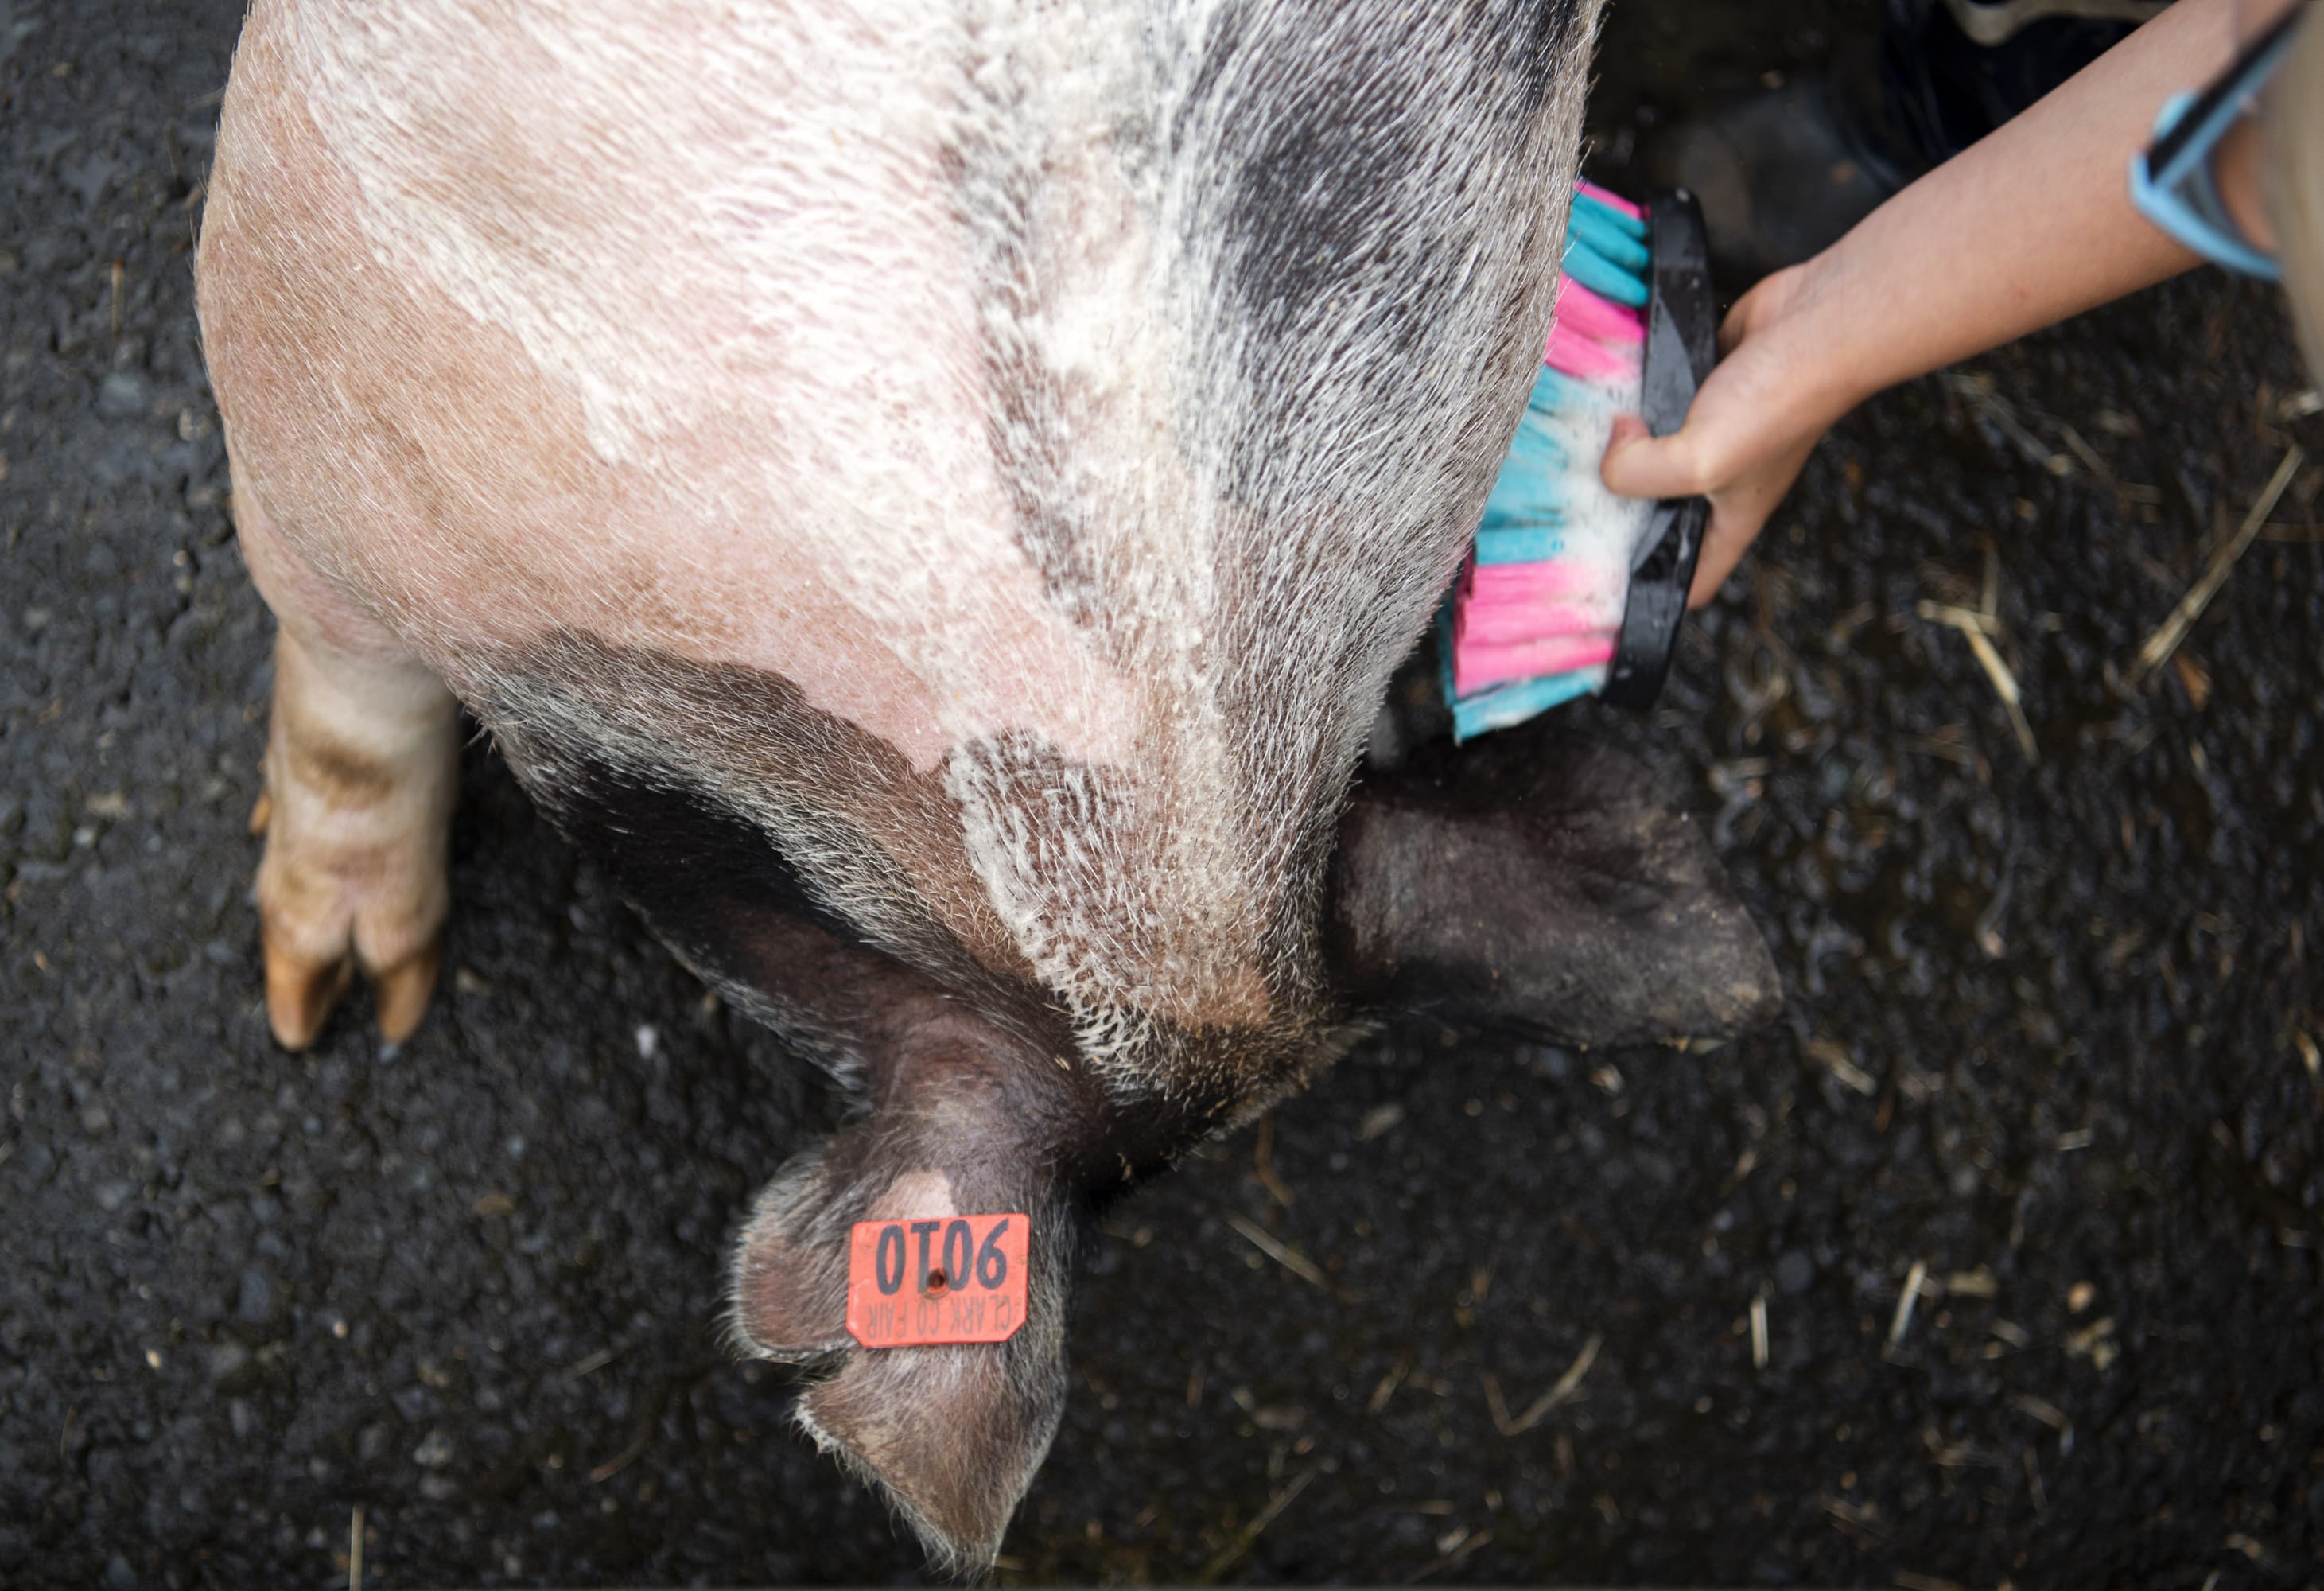 Hayden Hunzeker of Ridgefield, 10, washes her pig at the Clark County Fairgrounds in Ridgefield on Wednesday morning, August 7, 2019.